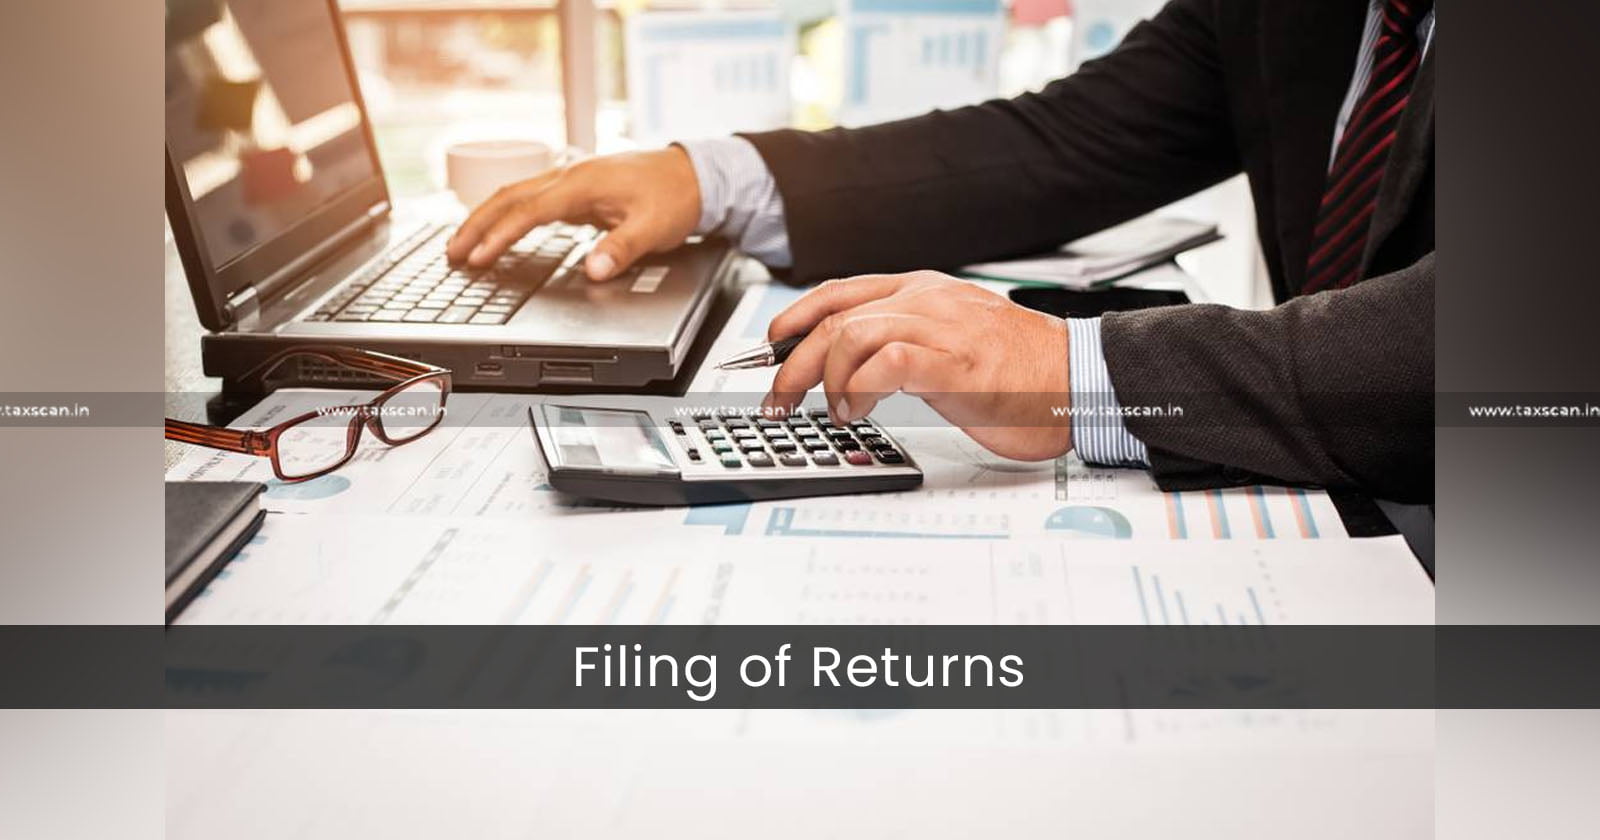 Employer Contribution - income tax act - payment - filing of returns - ITAT - Taxscan